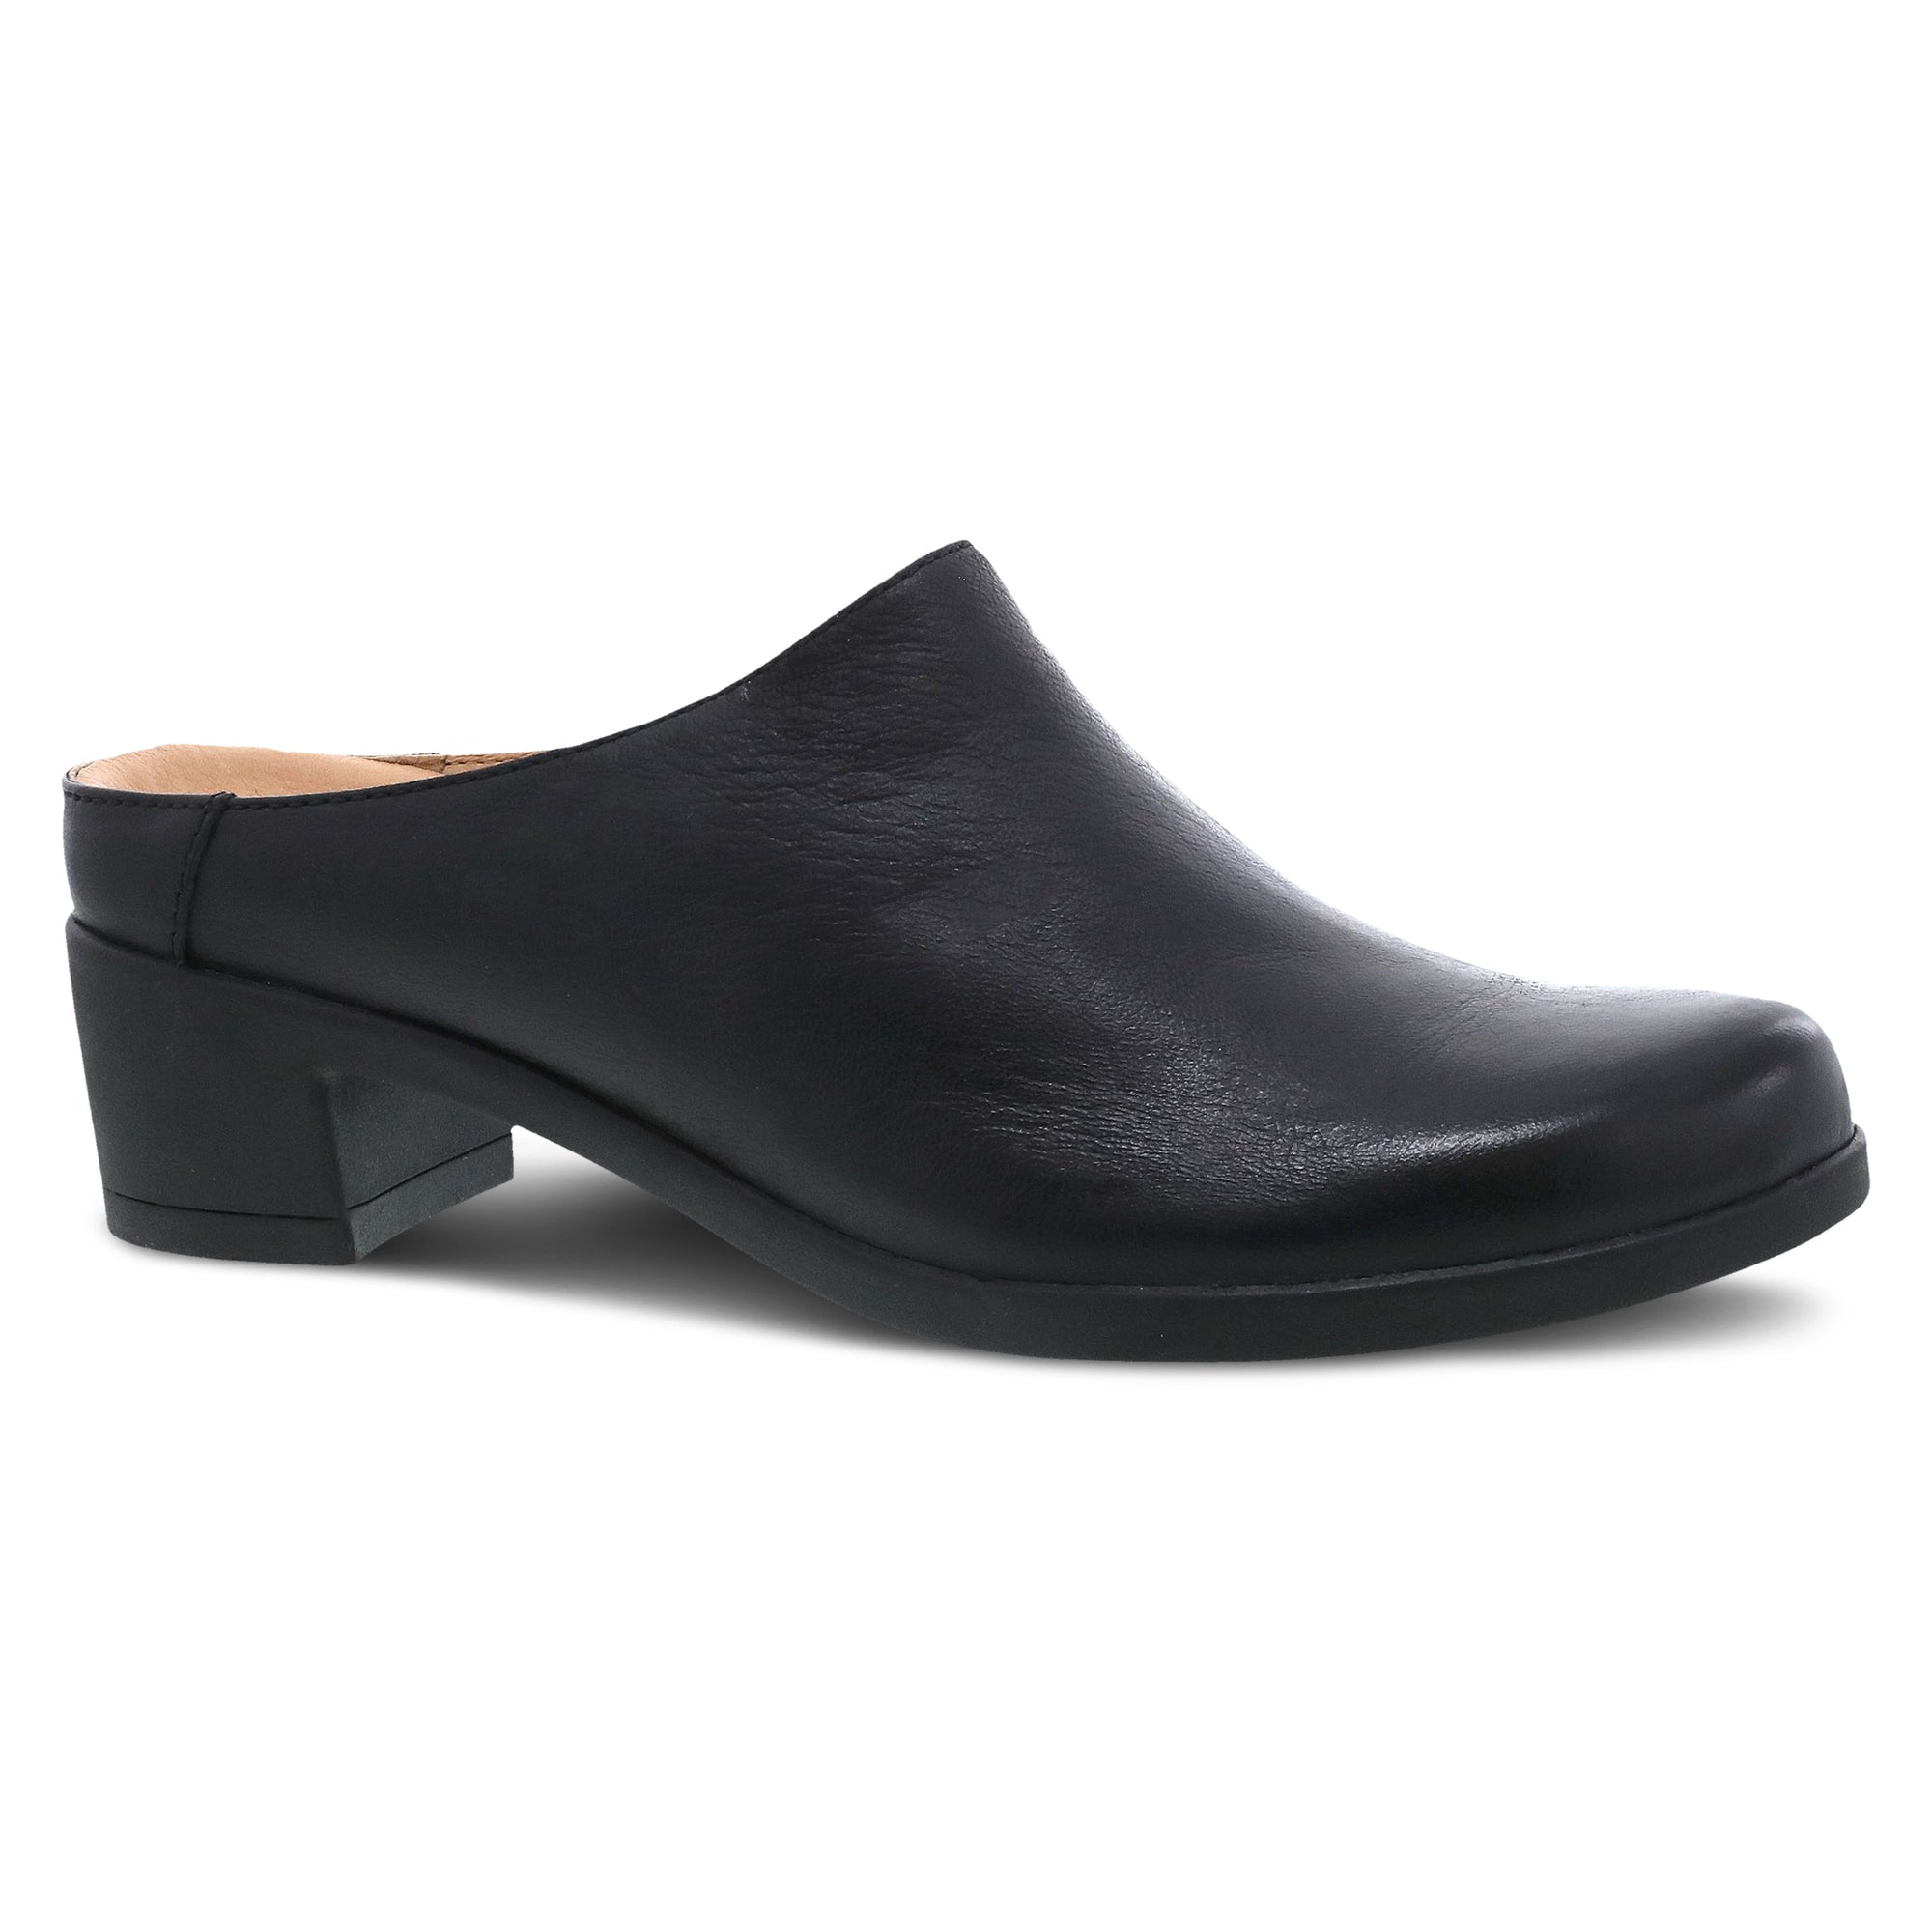 Primary image of Carrie Black Burnished Nubuck